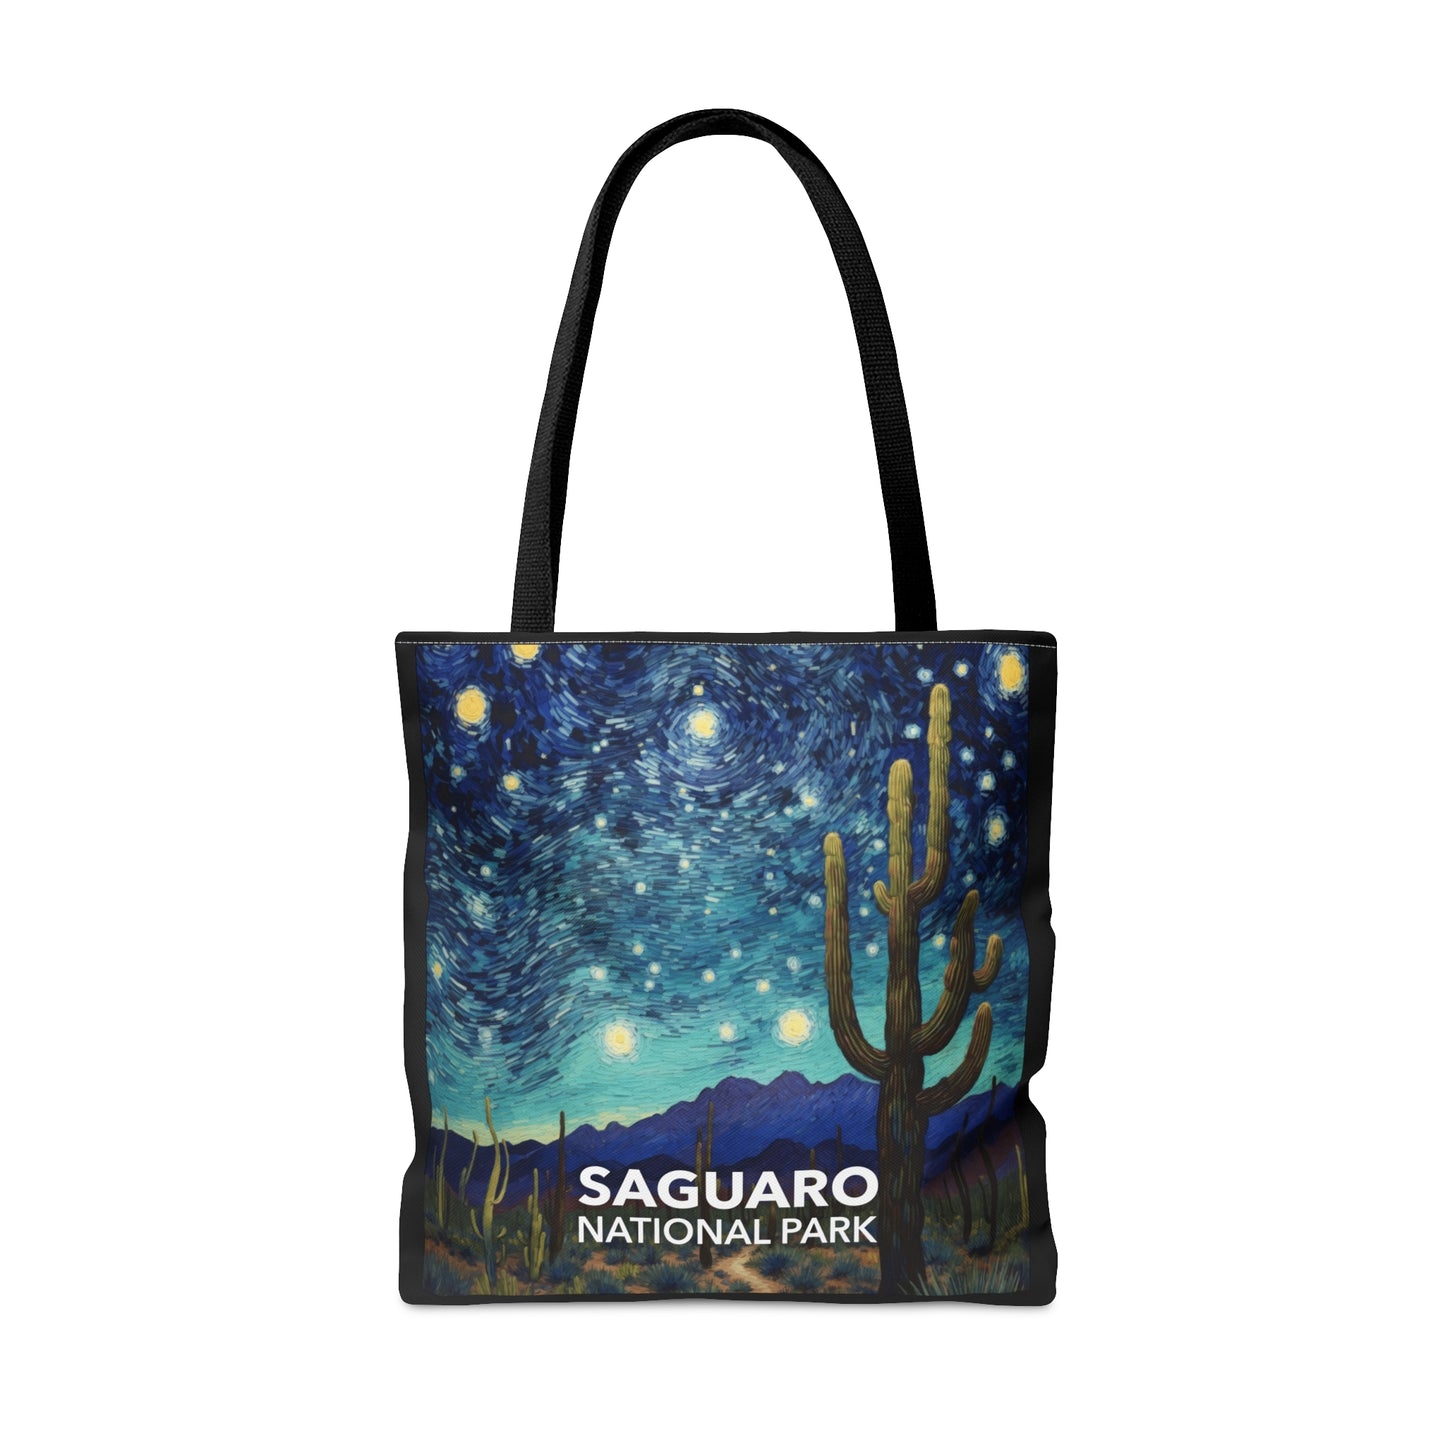 Saguaro National Park Tote Bag - The Starry Night